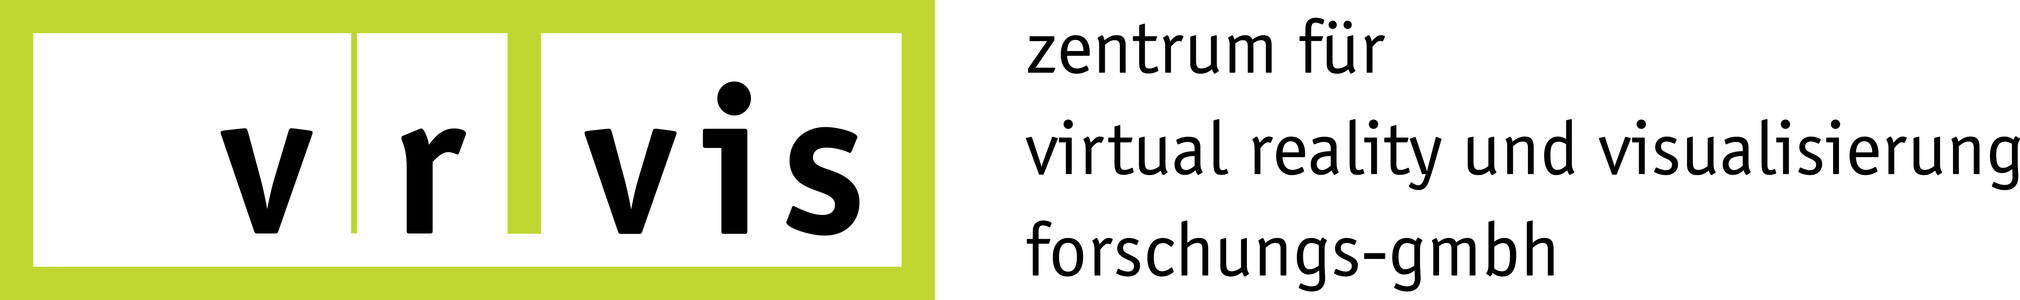 Postdoc / PhD Candidate (f/m/d): Deep Learning for Image Analysis and Visualization - VRVis Zentrum für Virtual Reality und Visualisierung Forschungs-GmbH - Logo